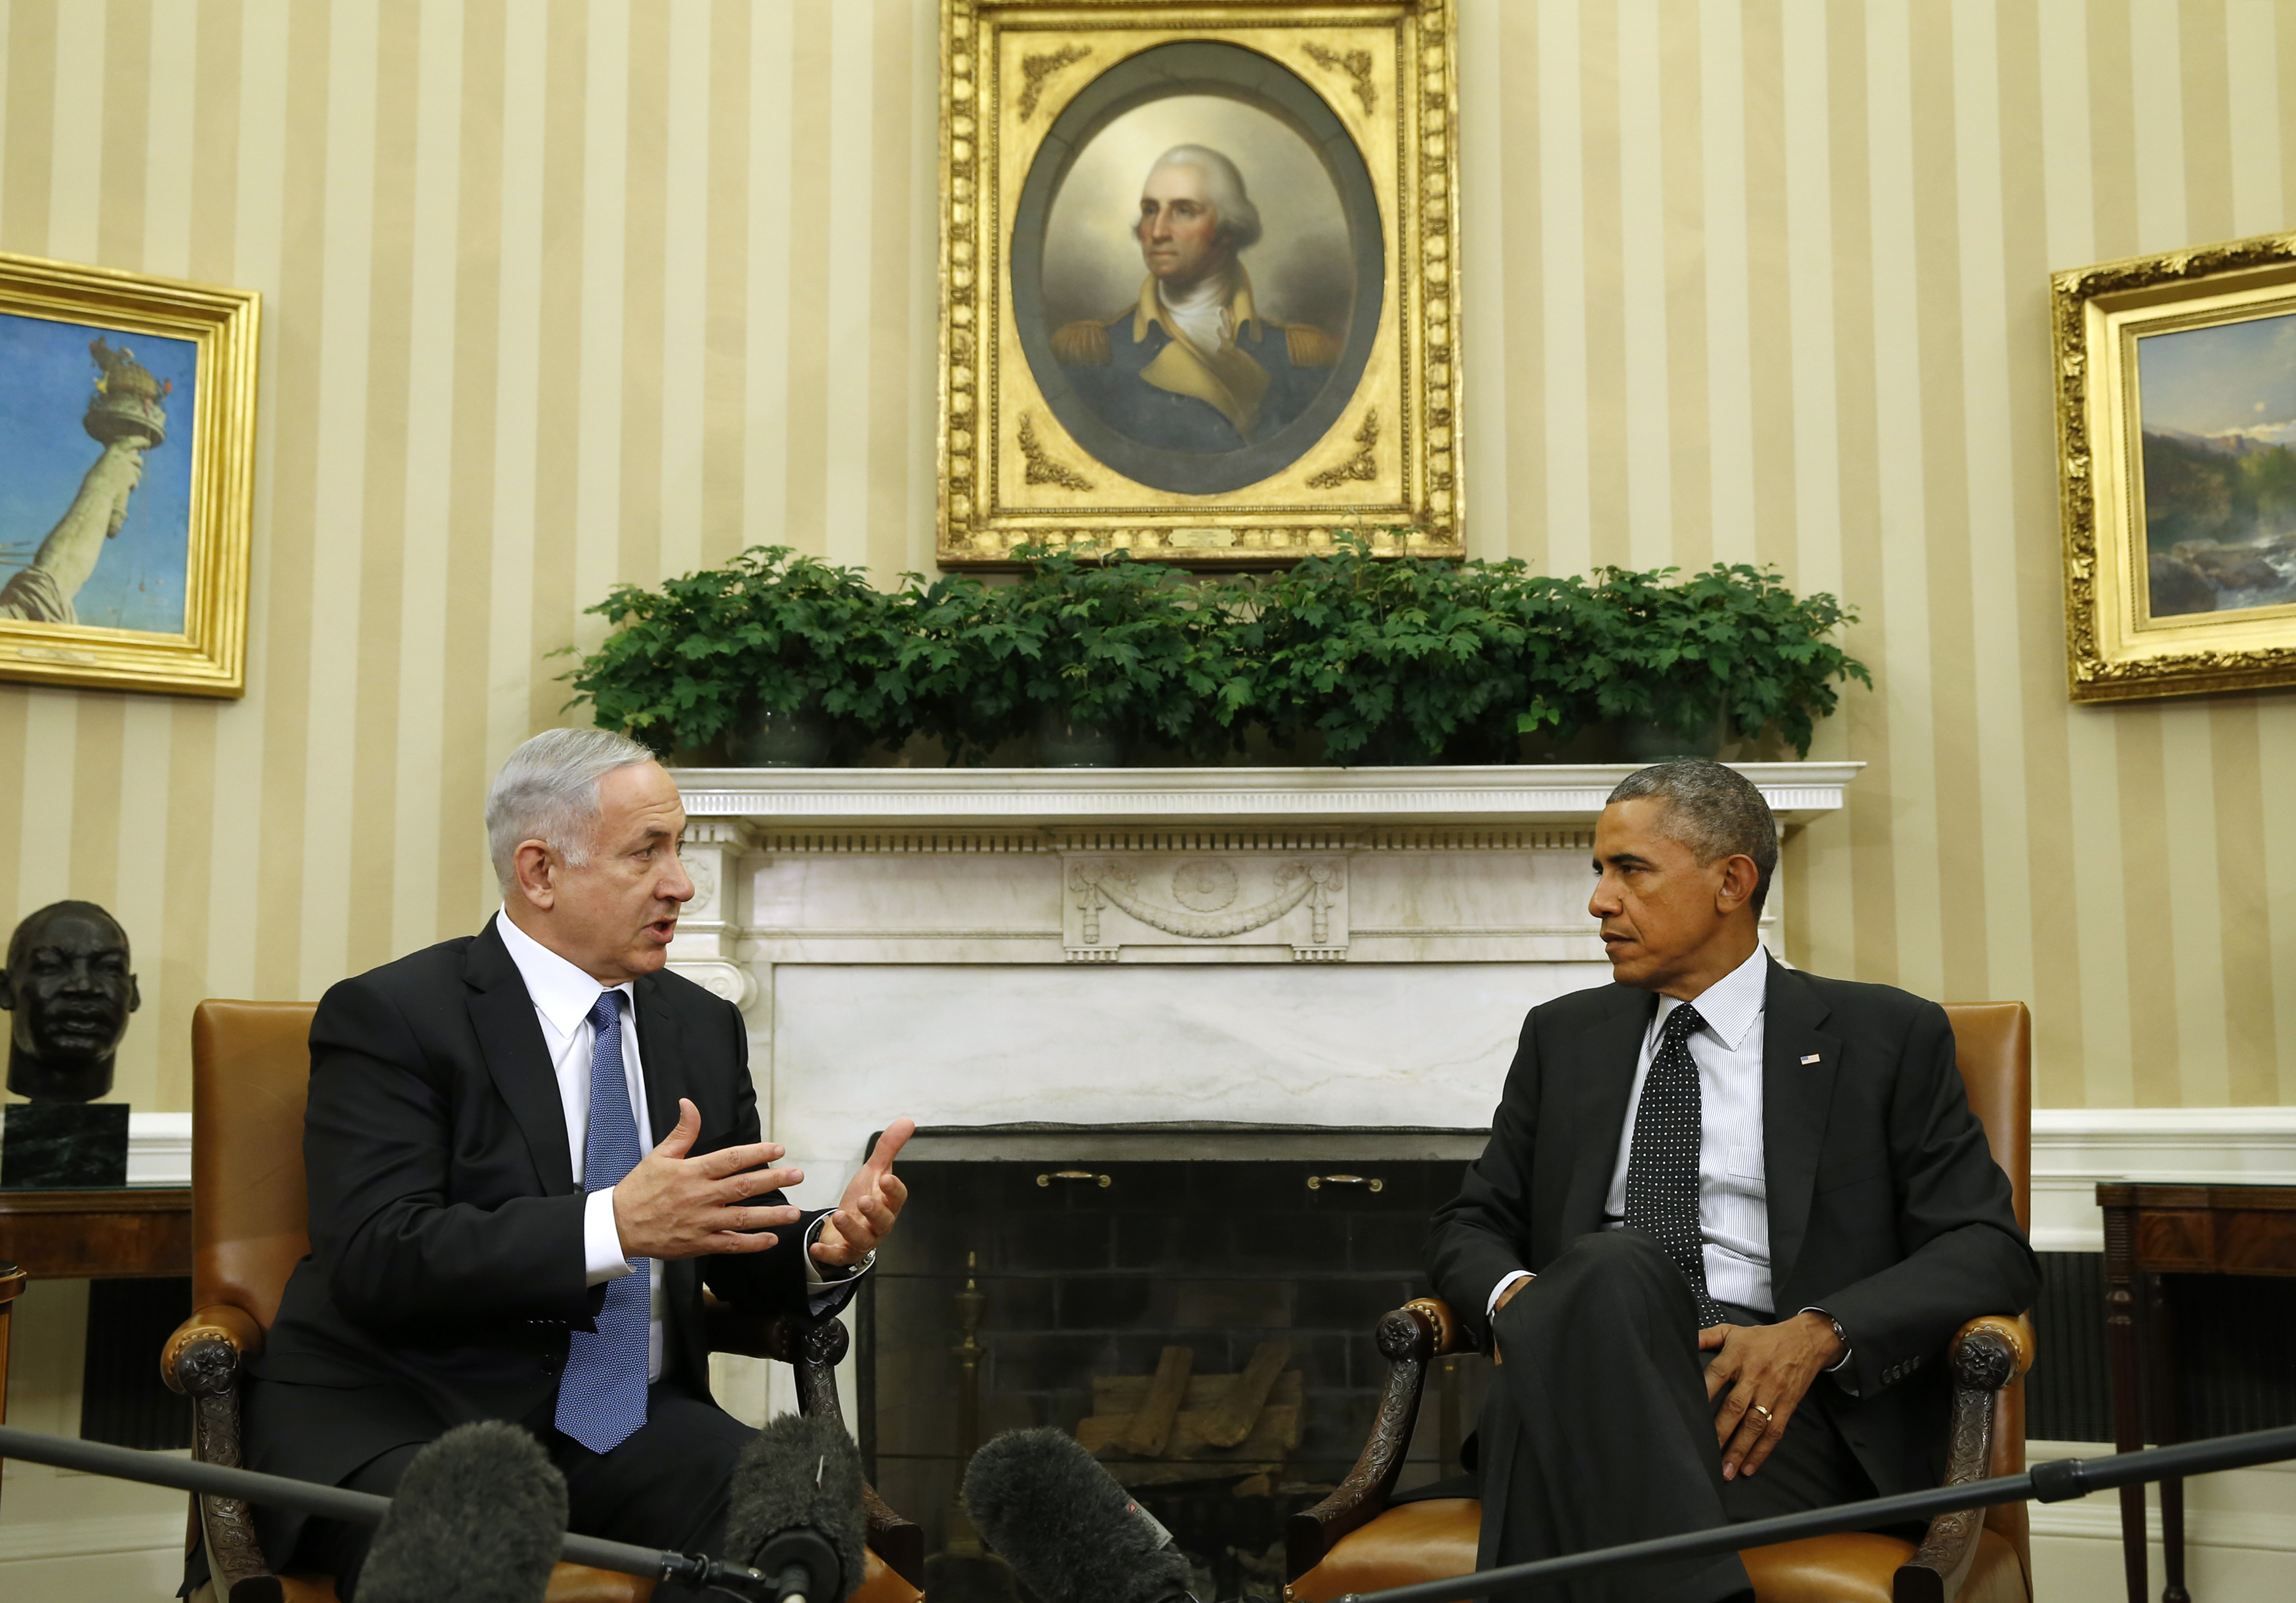 President Barack Obama meets with Israel's Prime Minister Benjamin Netanyahu at the White House in Washington on Oct. 1,  2014.